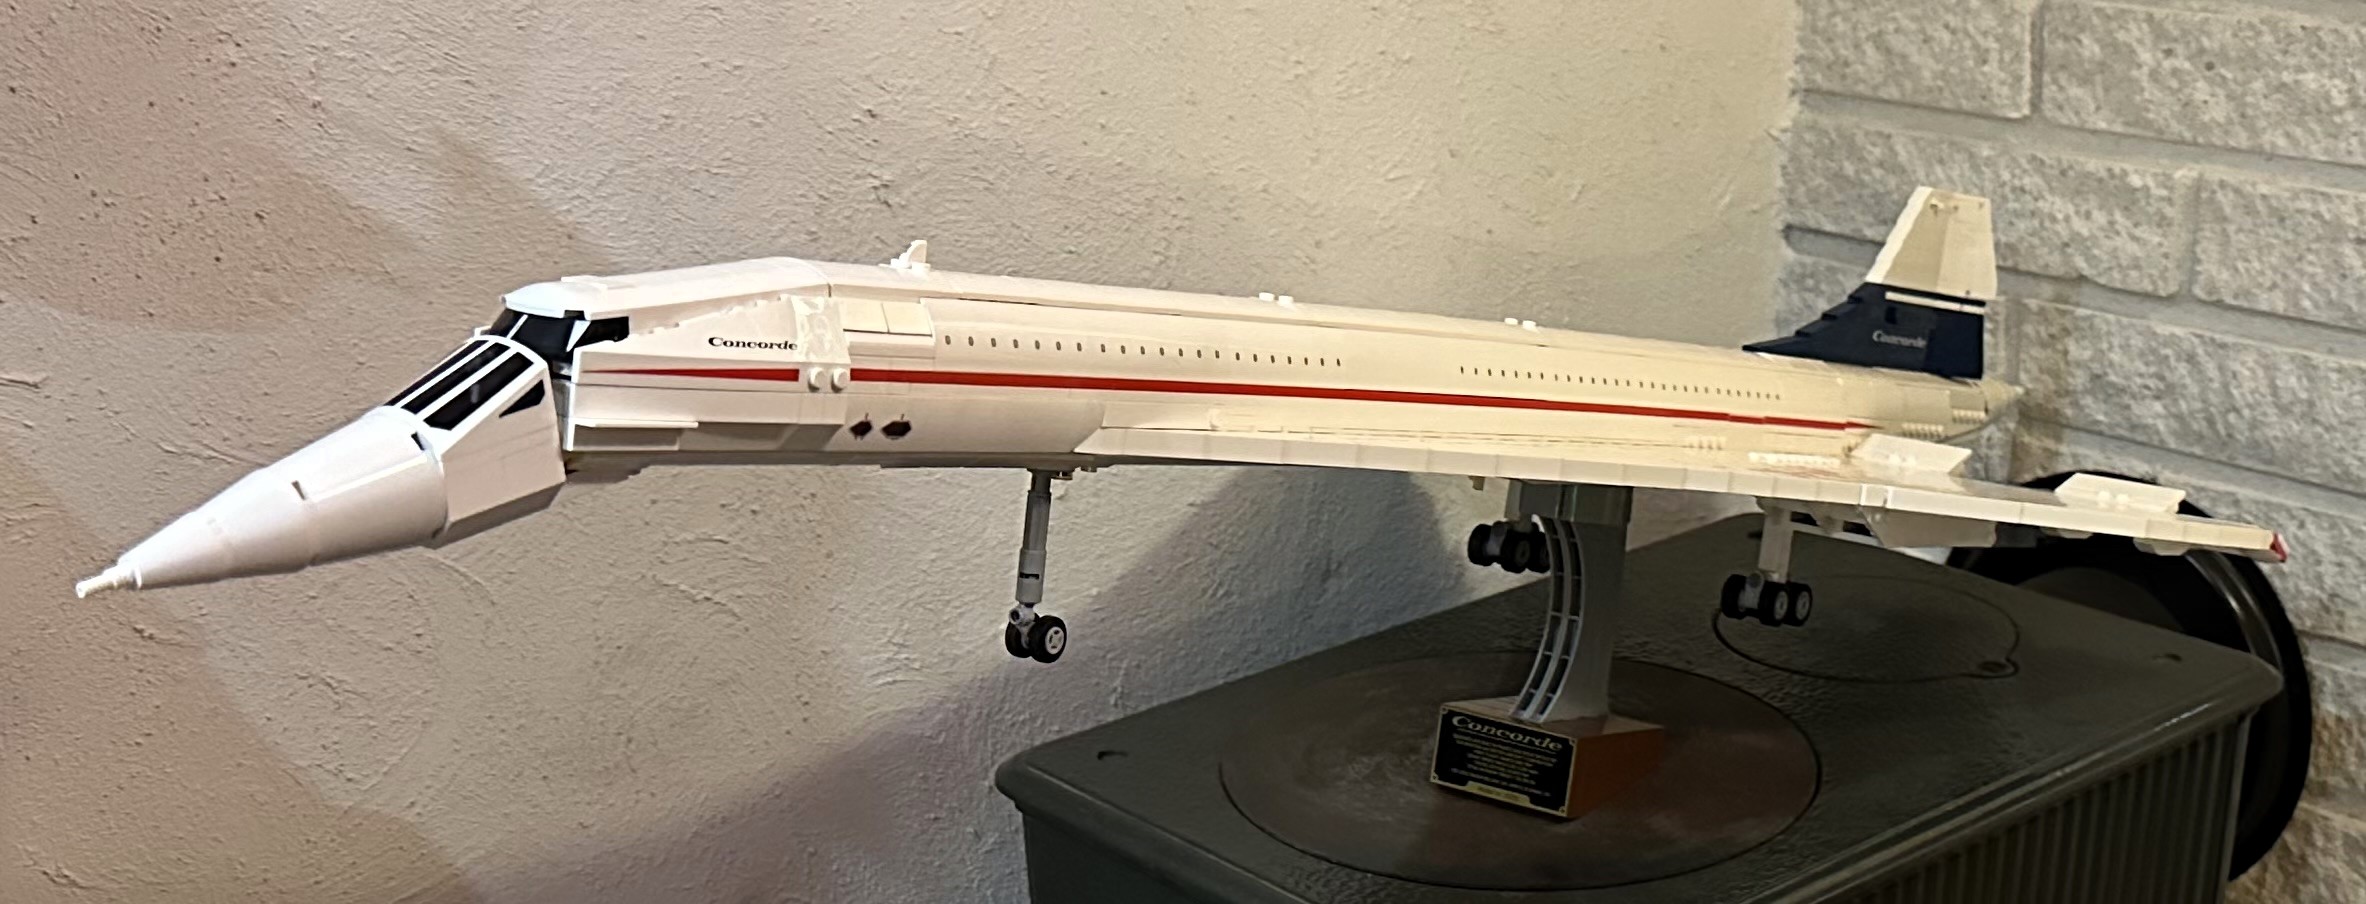 image from LEGO Concorde